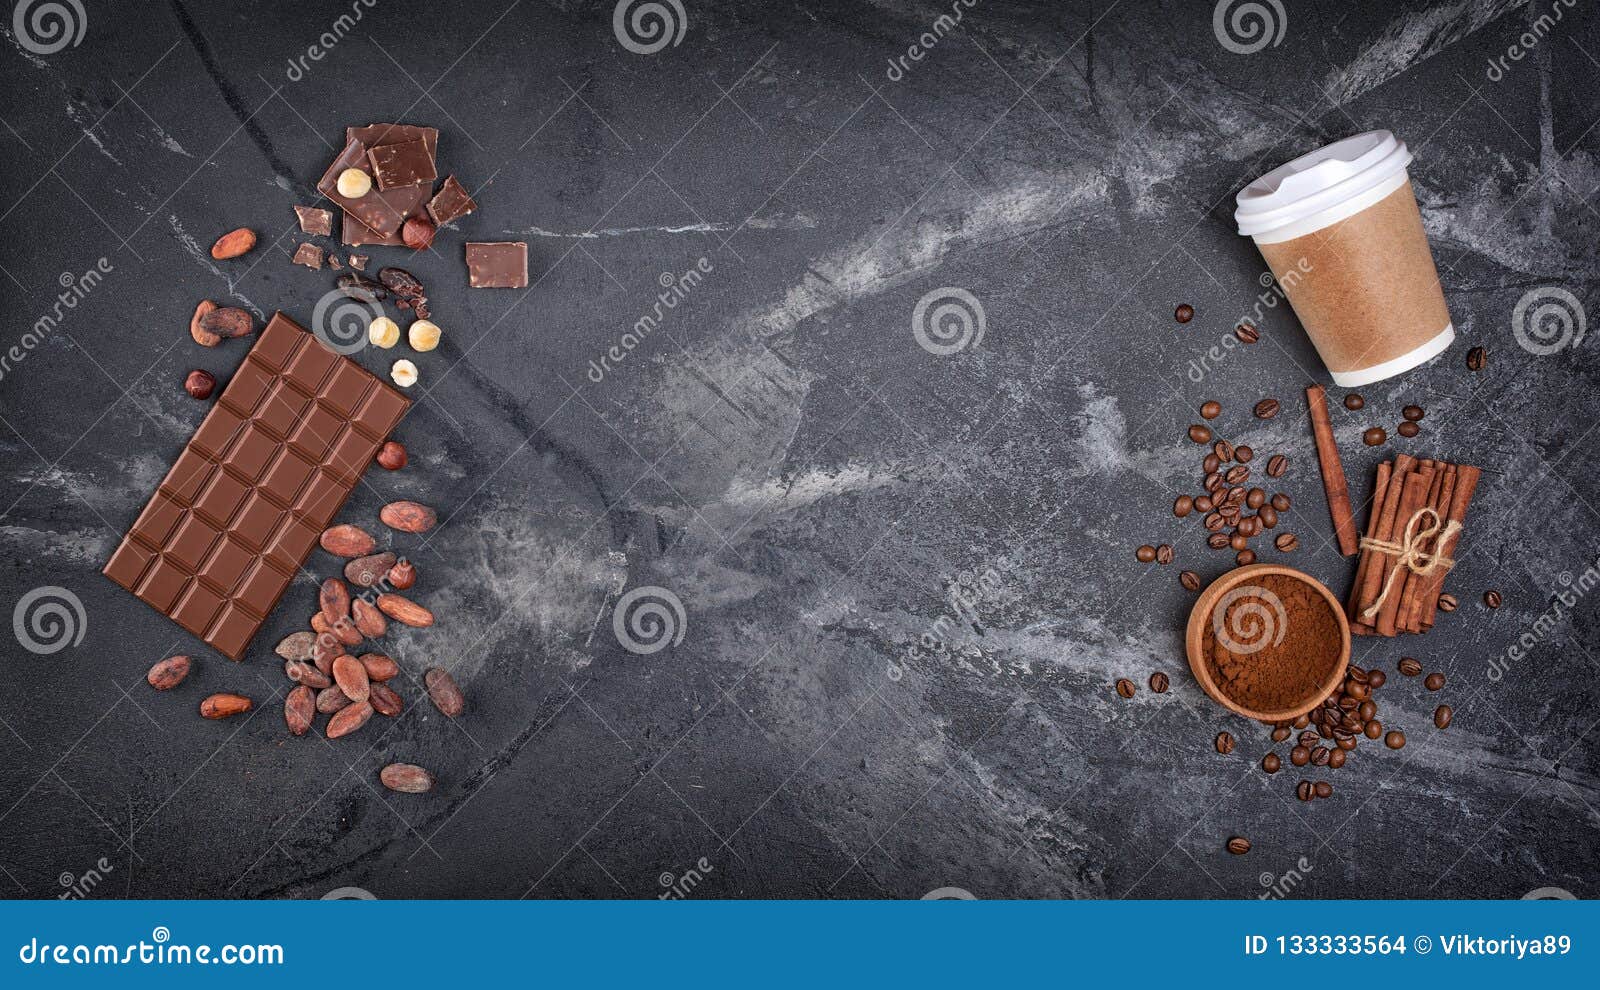 Download Top View Of Disposable Take Out Mockup Cup With Spices And Chocolate Bars With Cocoa Beans And Hazelnuts Stock Photo Image Of Bean Broken 133333564